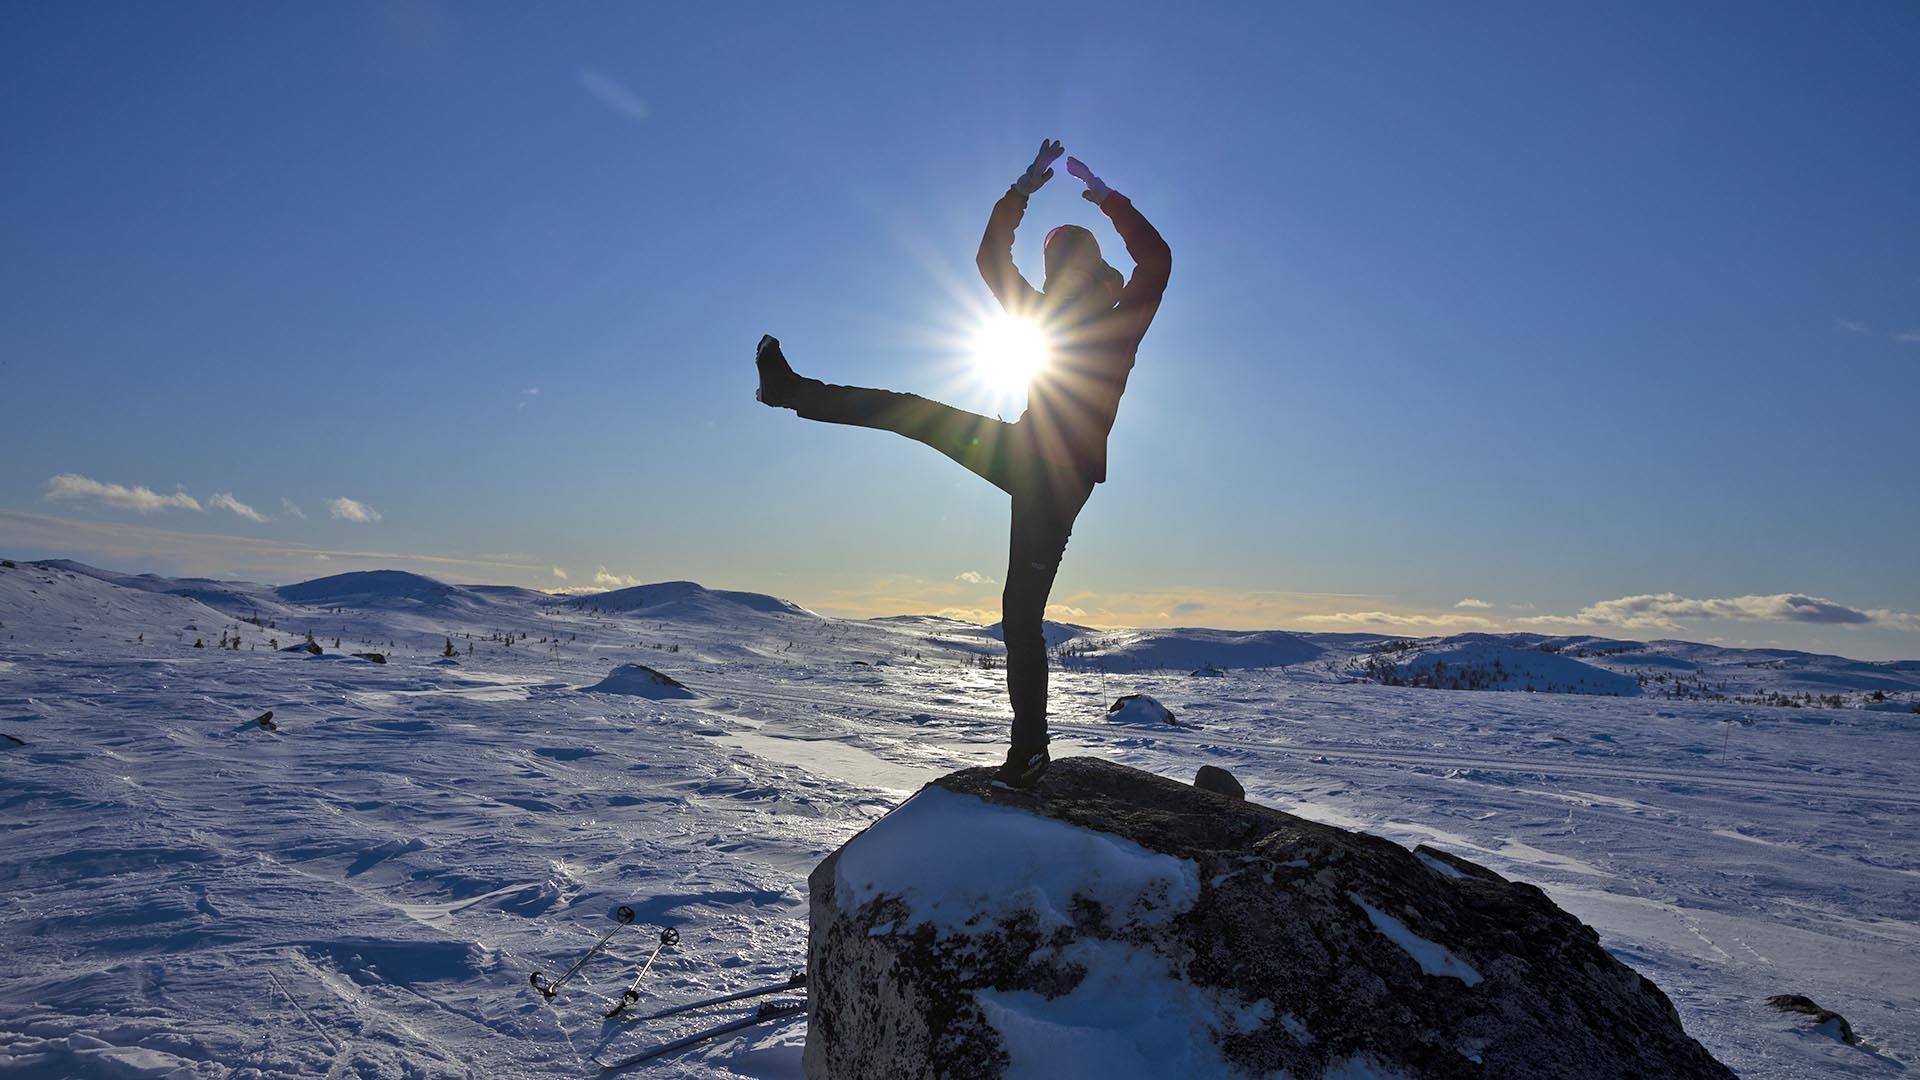 A girl stands on a rock in open snow-covered high country with the sun against. She is stiking a pose where the sun forms a multi-rayed star between one of her legs and an arm.